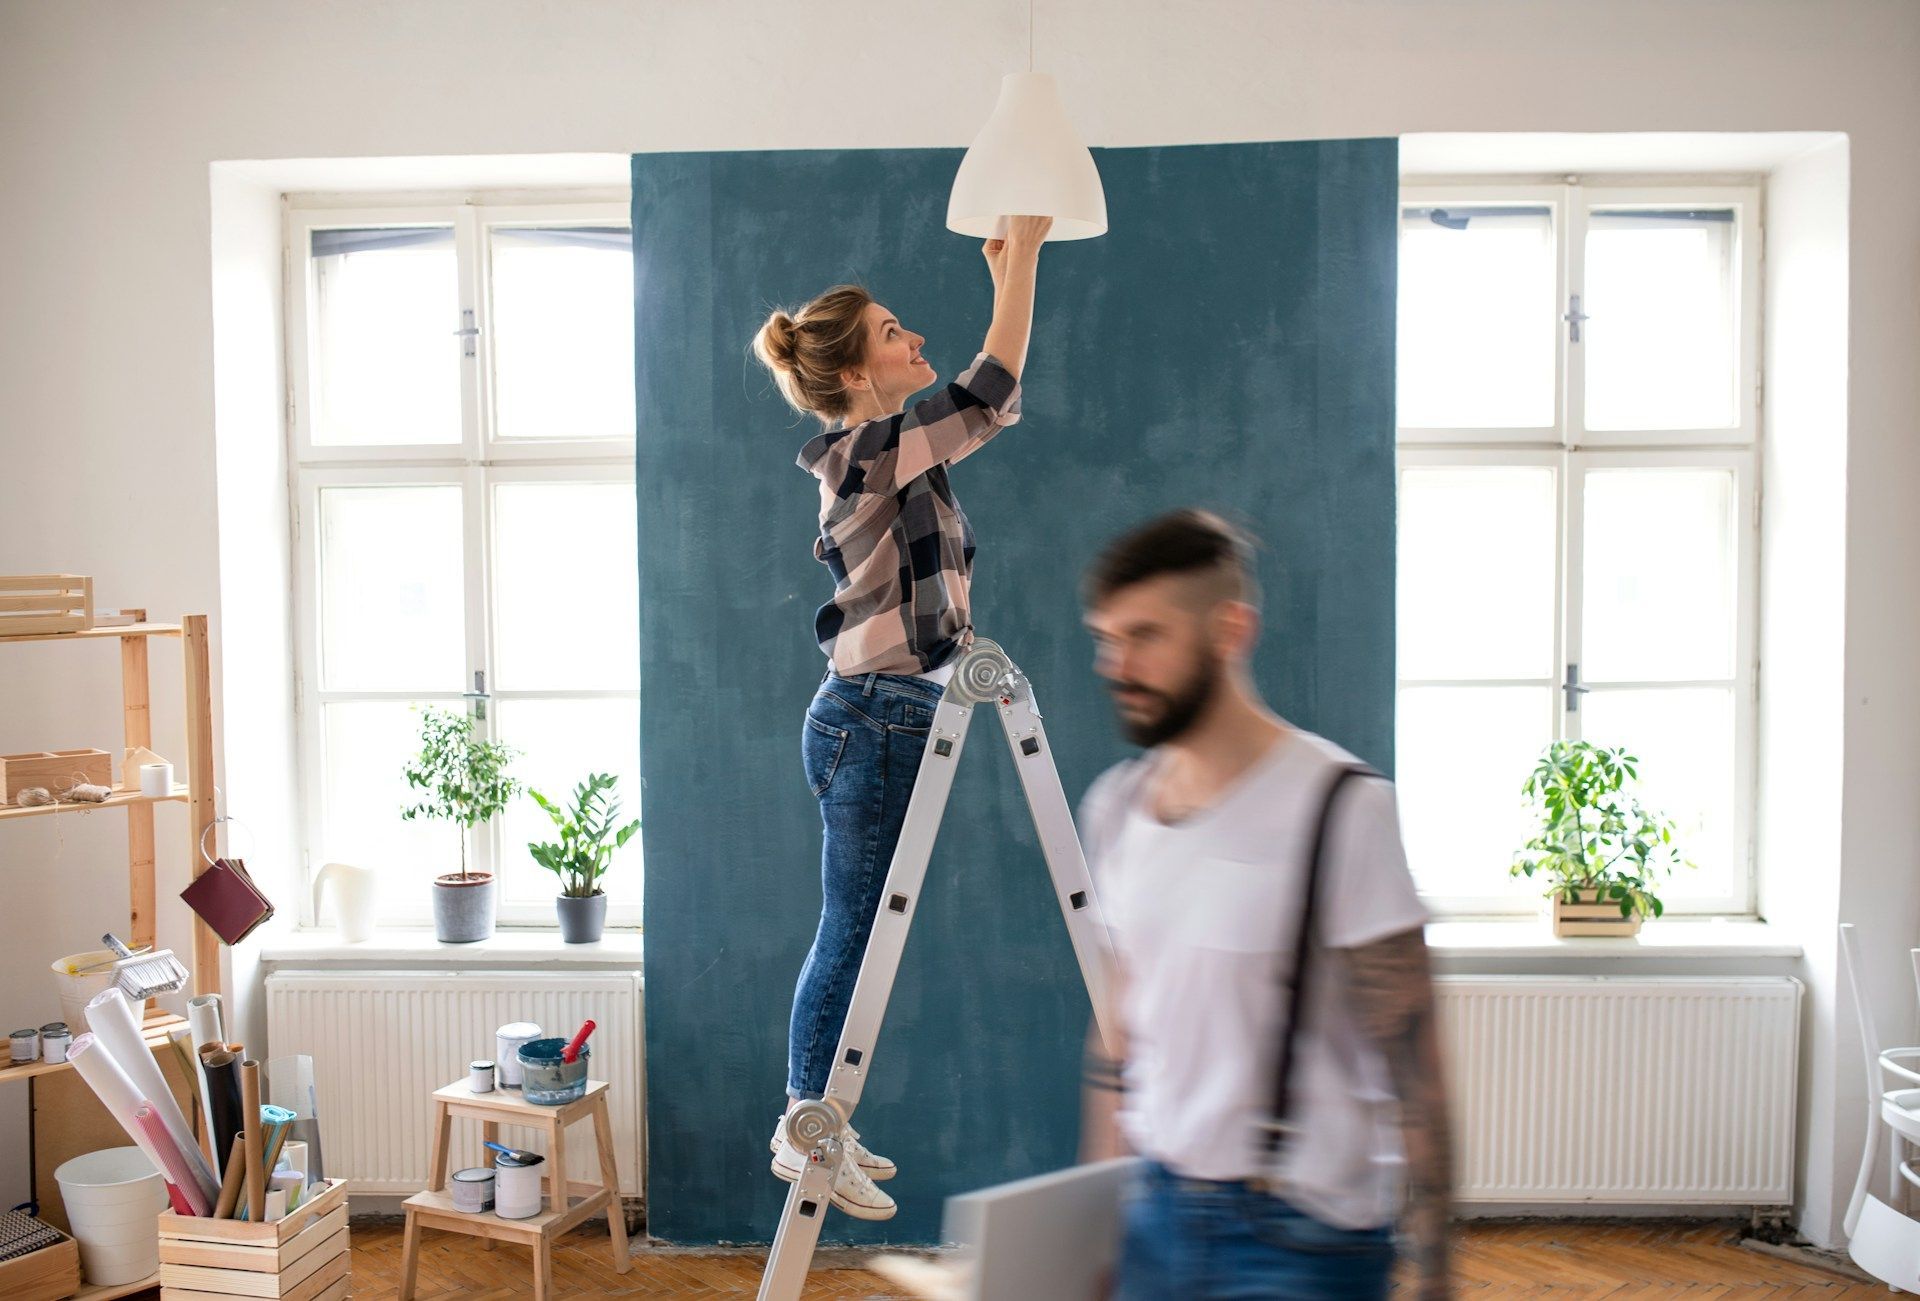 A woman is standing on a ladder hanging a lamp while a man looks on.